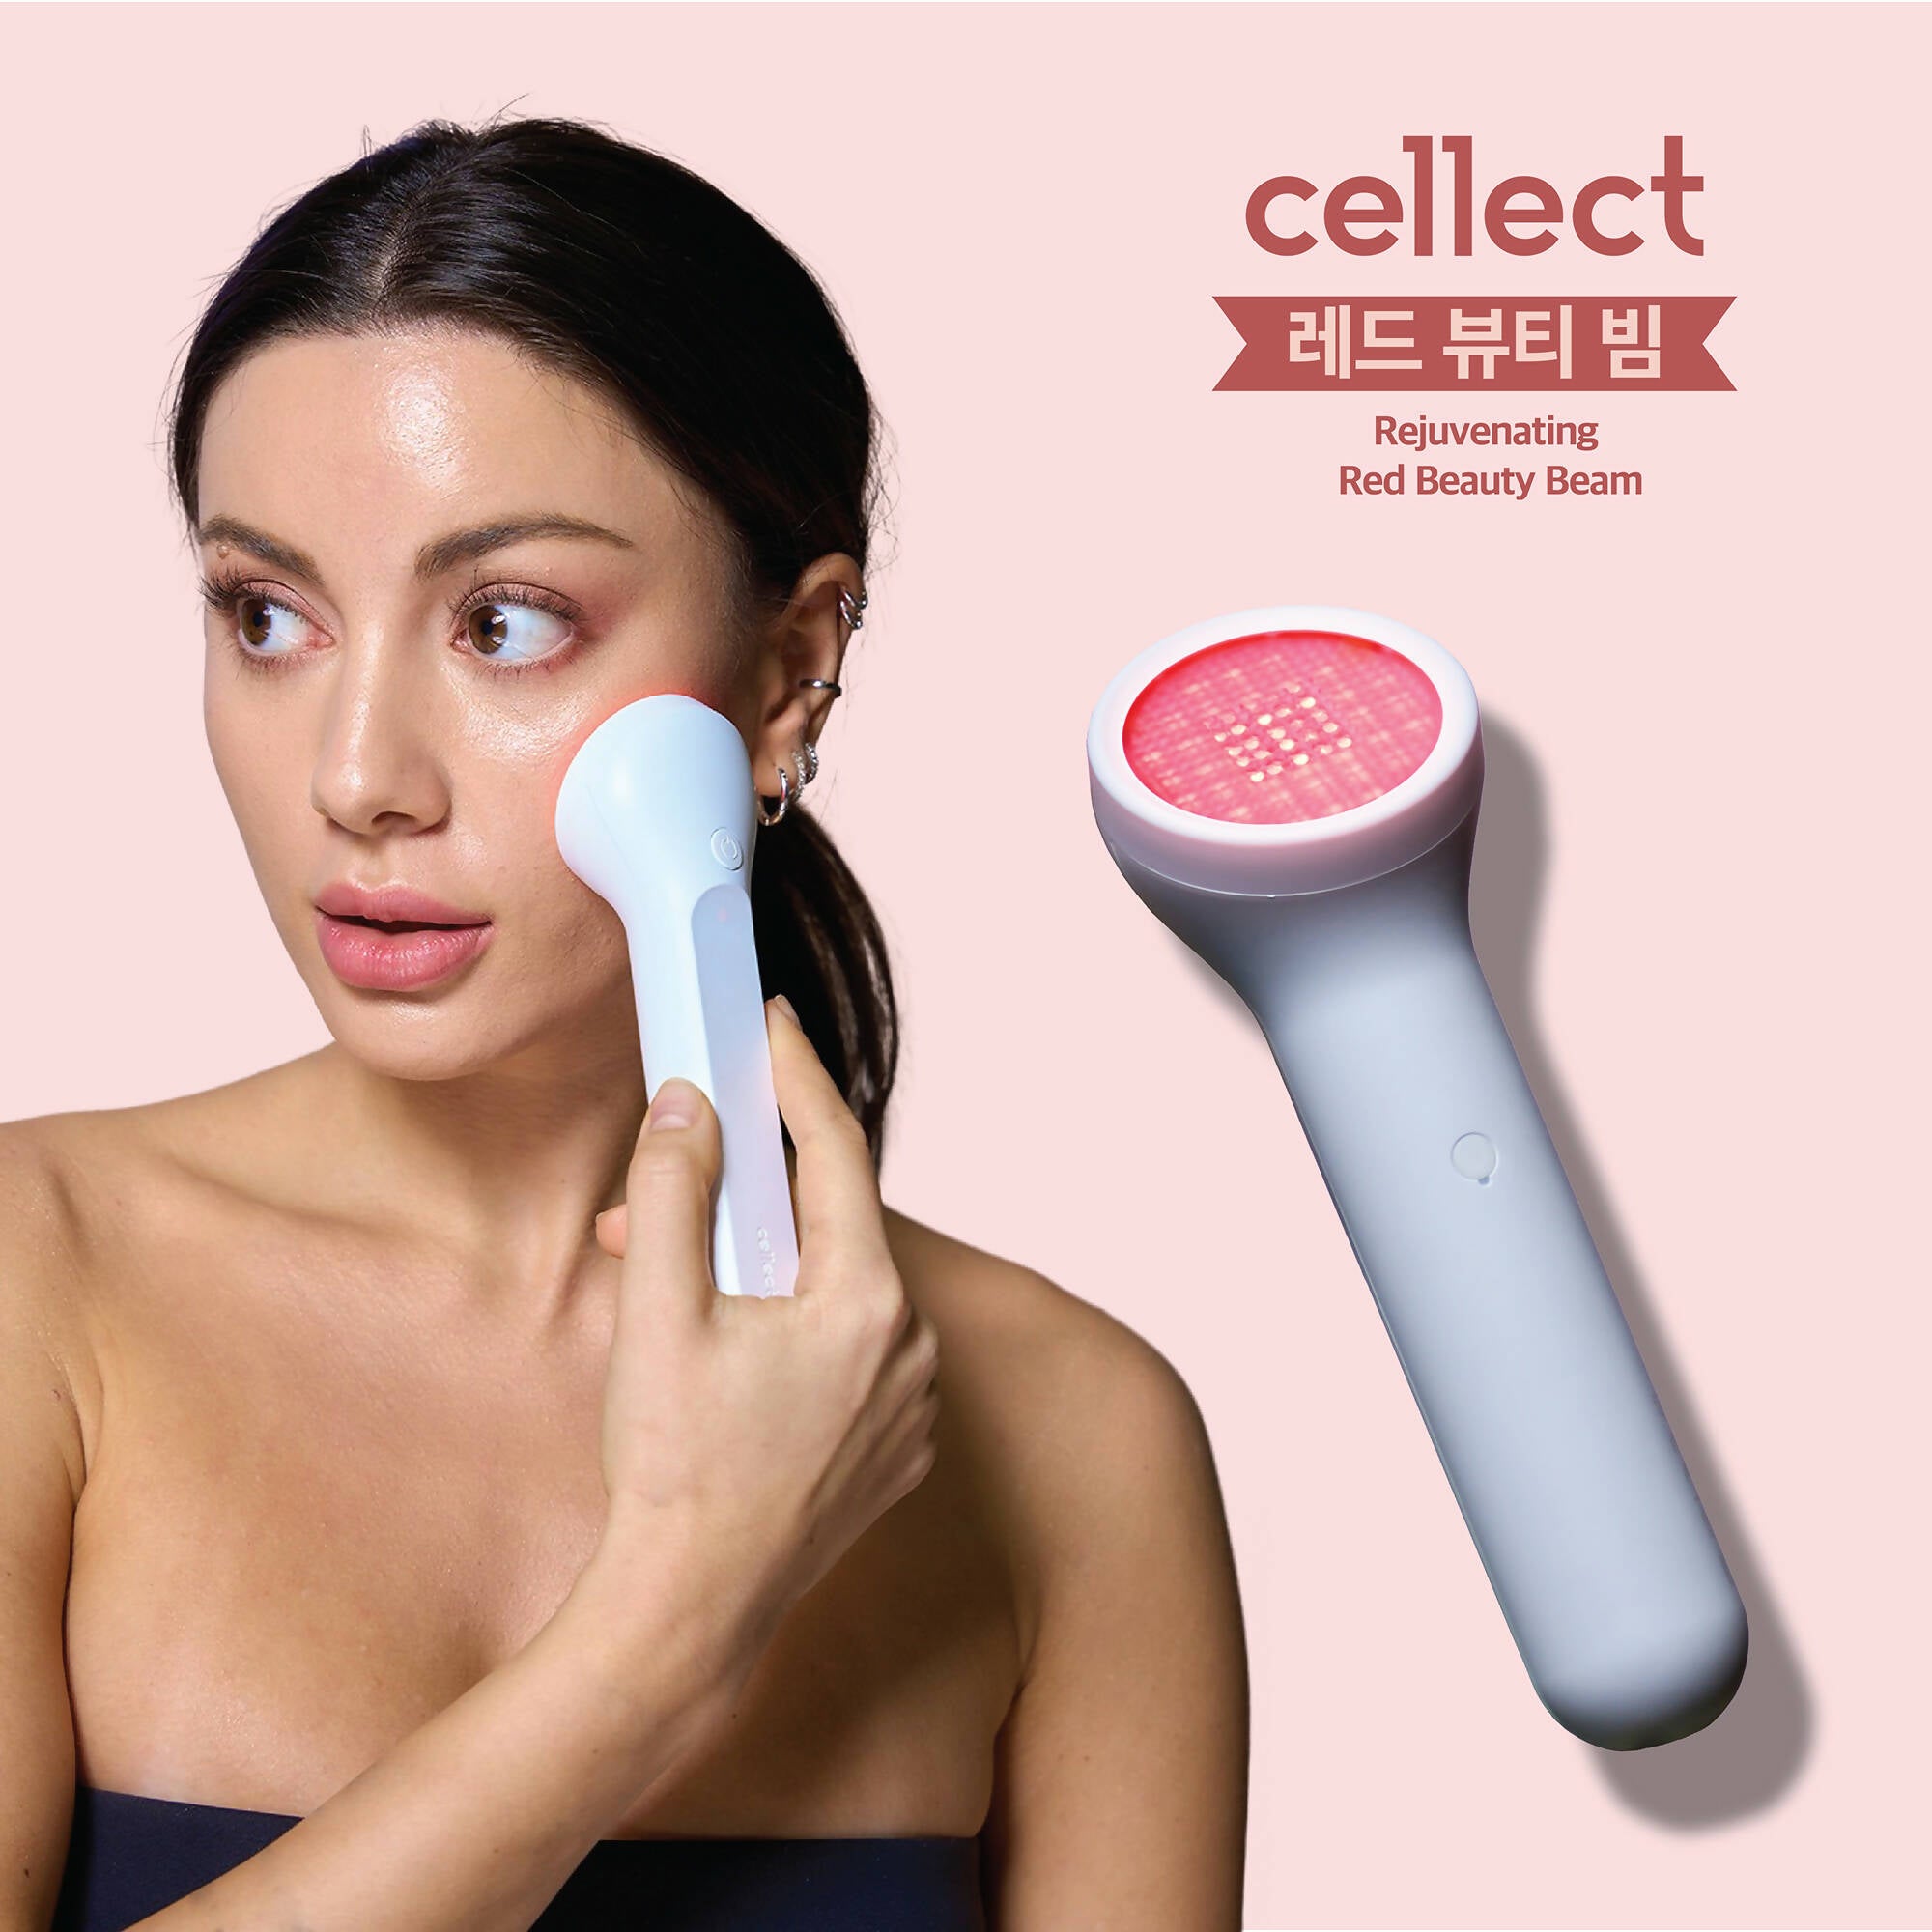 [Cellect Beauty] Rejuvenating Red Beauty Beam